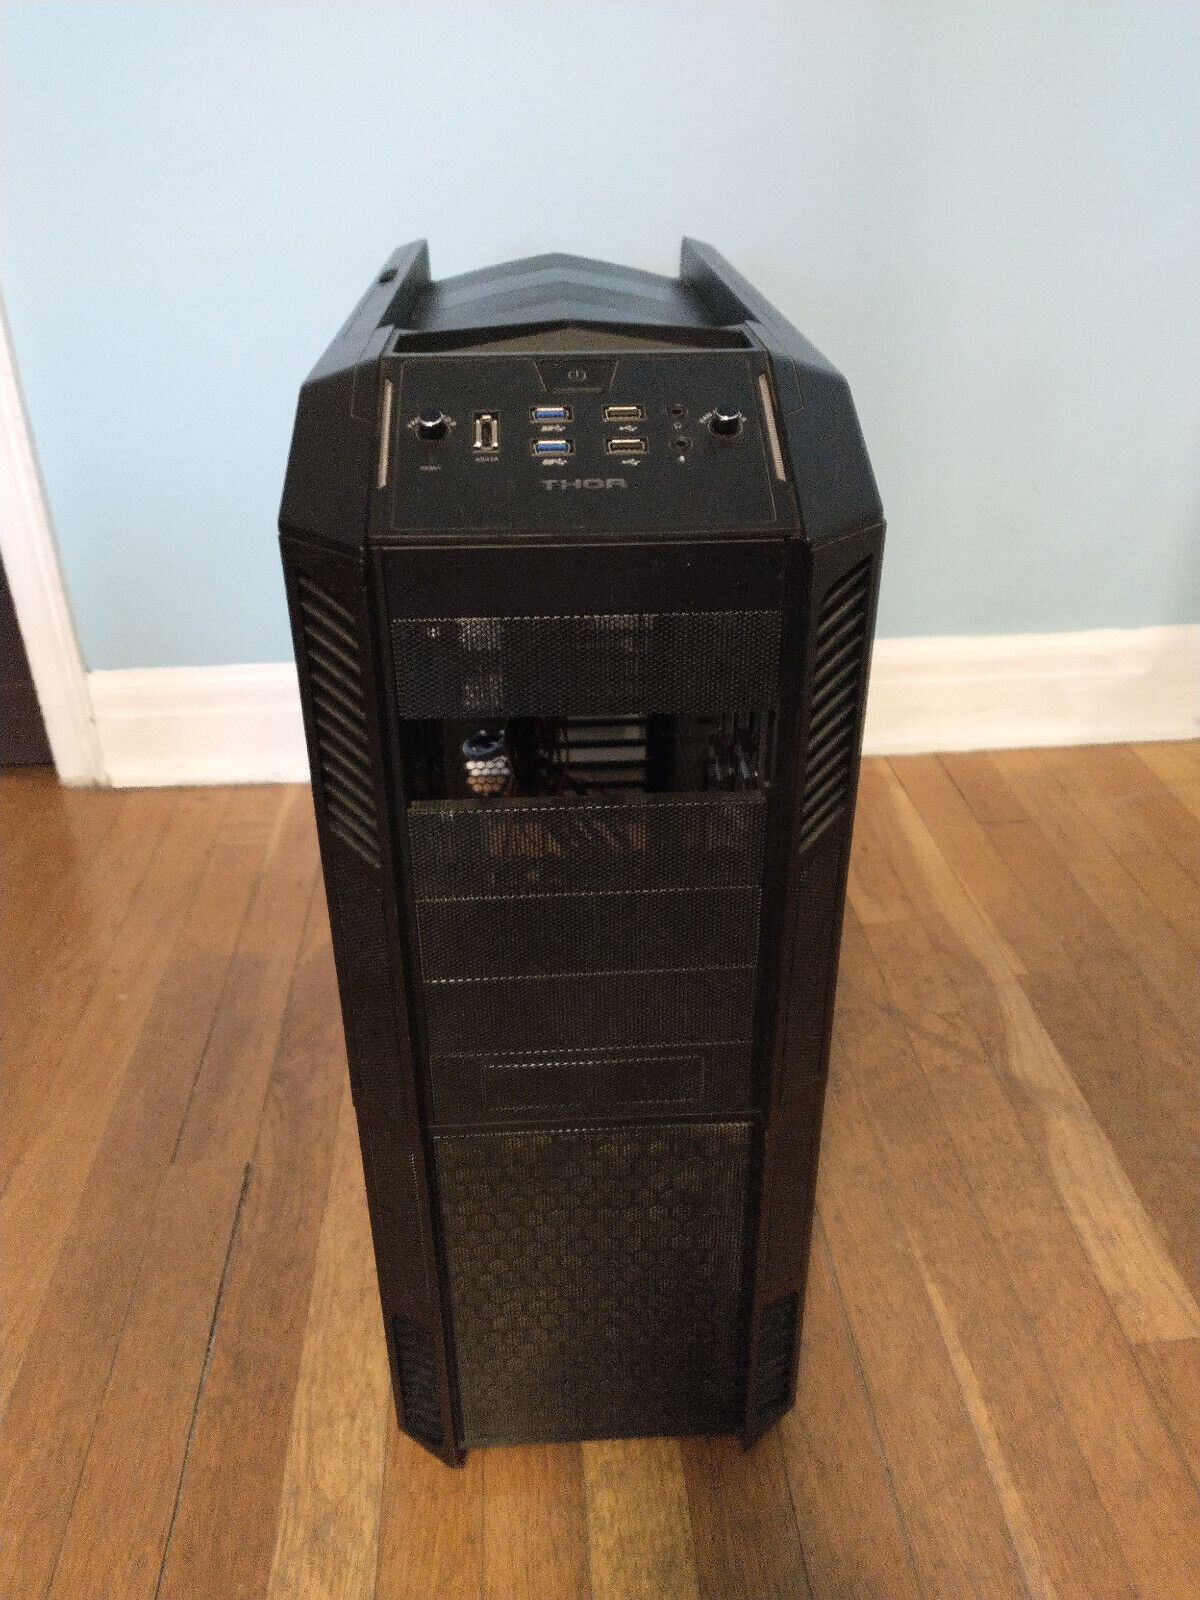 Rosewill Gaming ATX Full Tower Computer Case Cases THOR V2 - Black